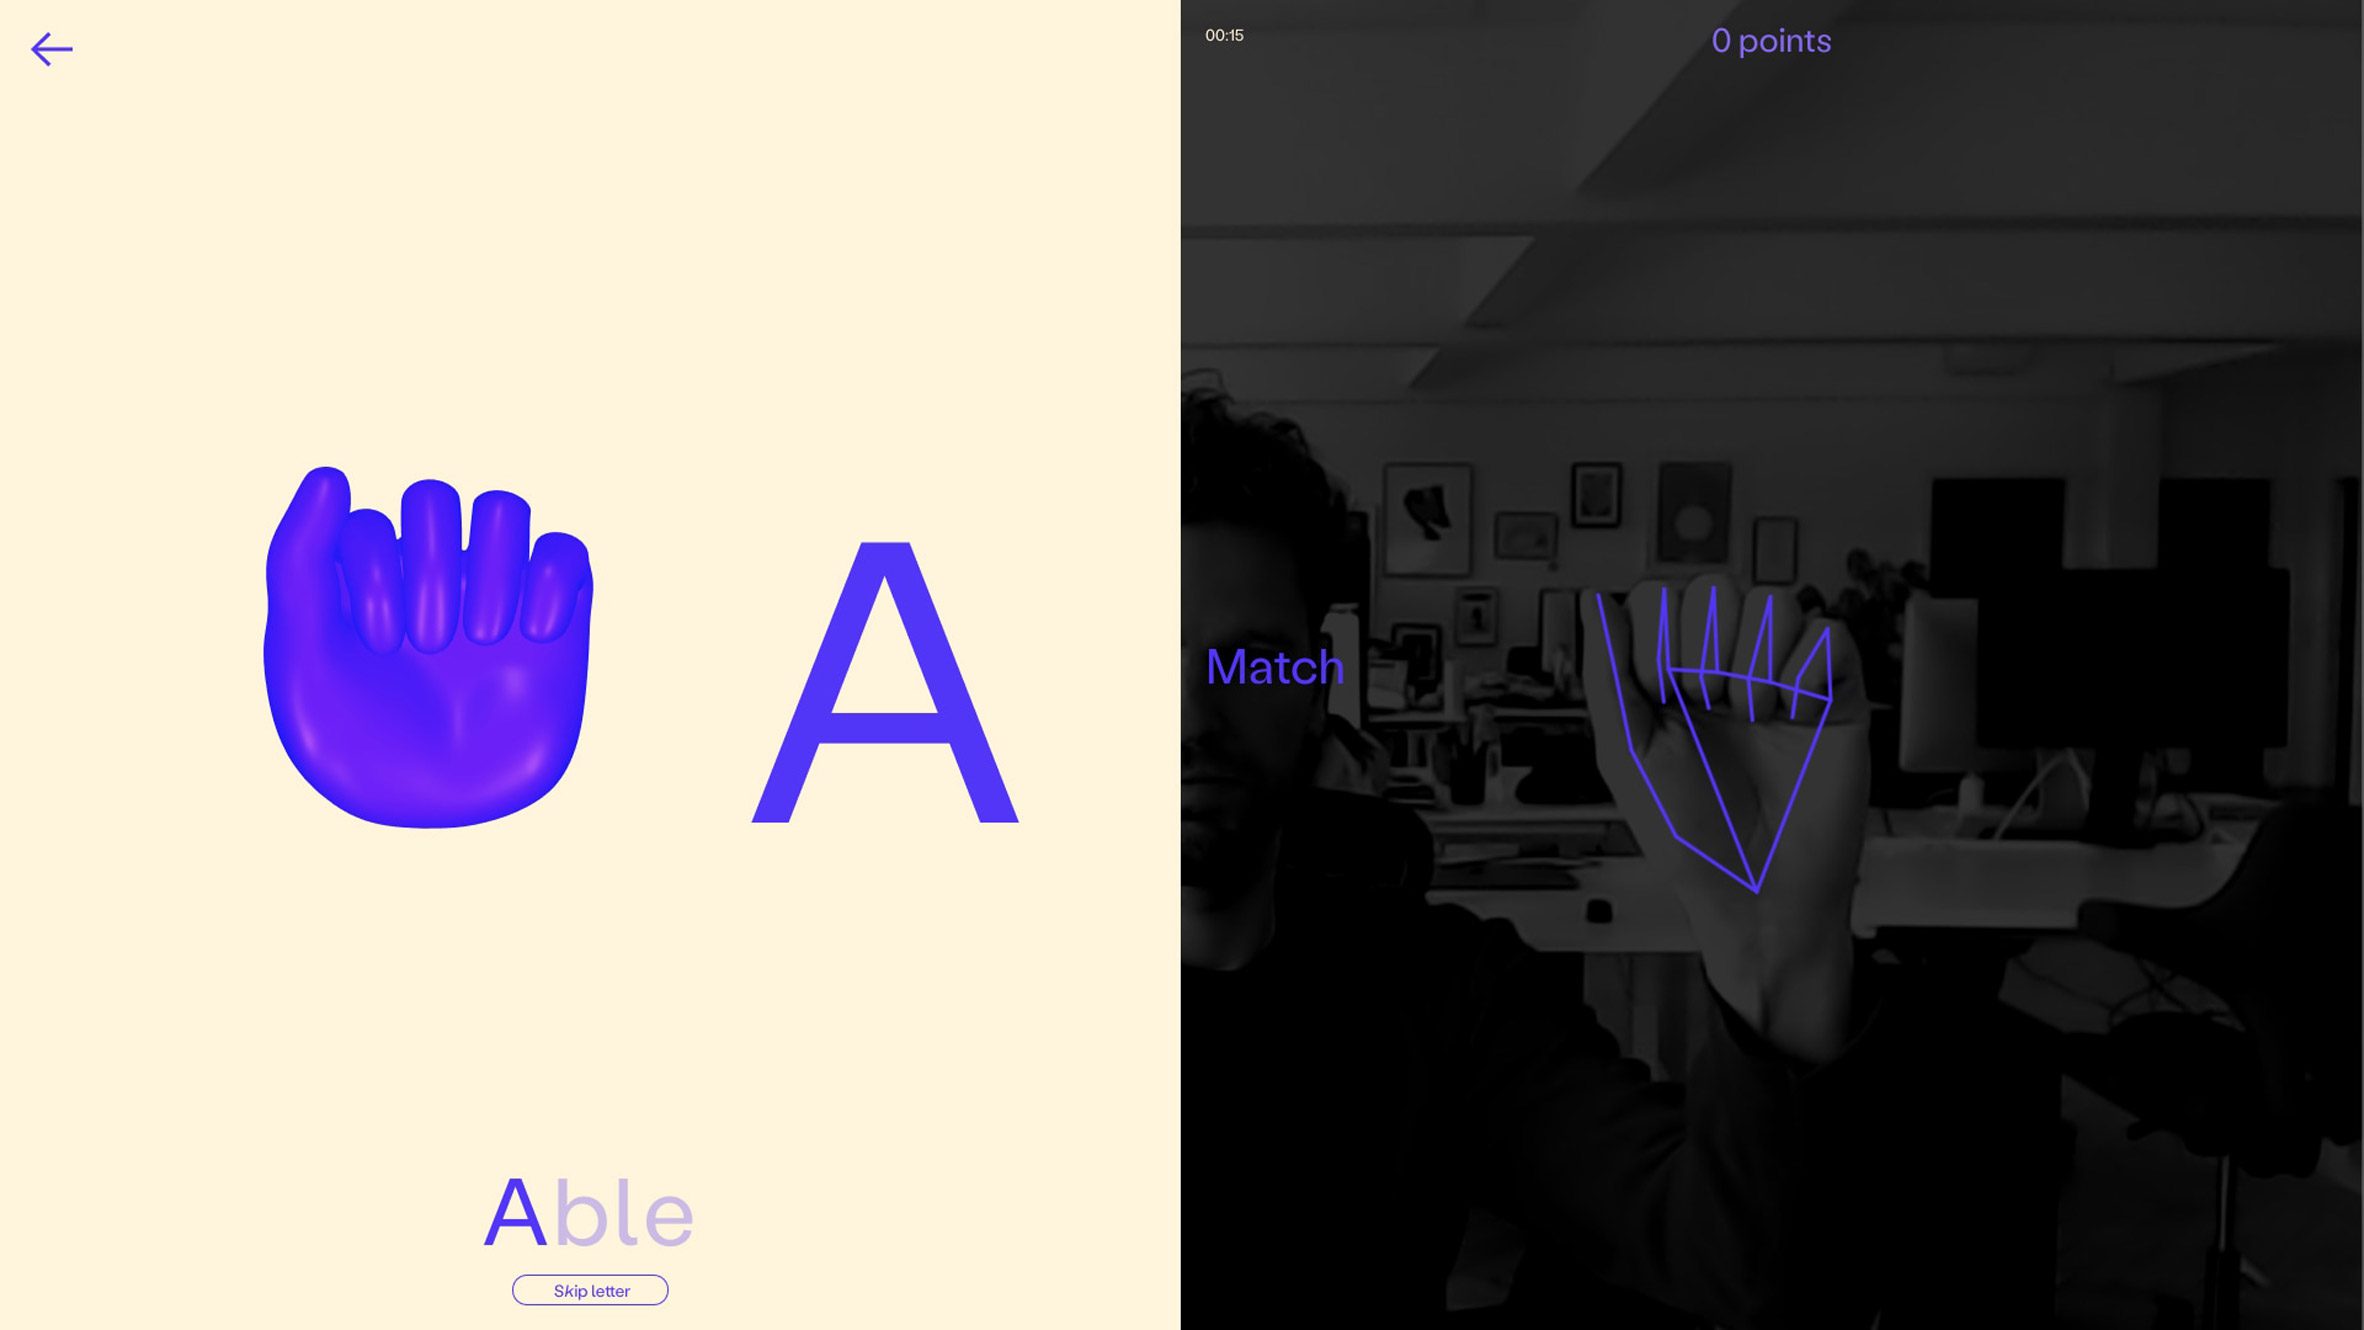 A splitscreen shows the letter A and a 3D hand in a fist salute shape on the left side and webcam view of a matching fist shape on the right